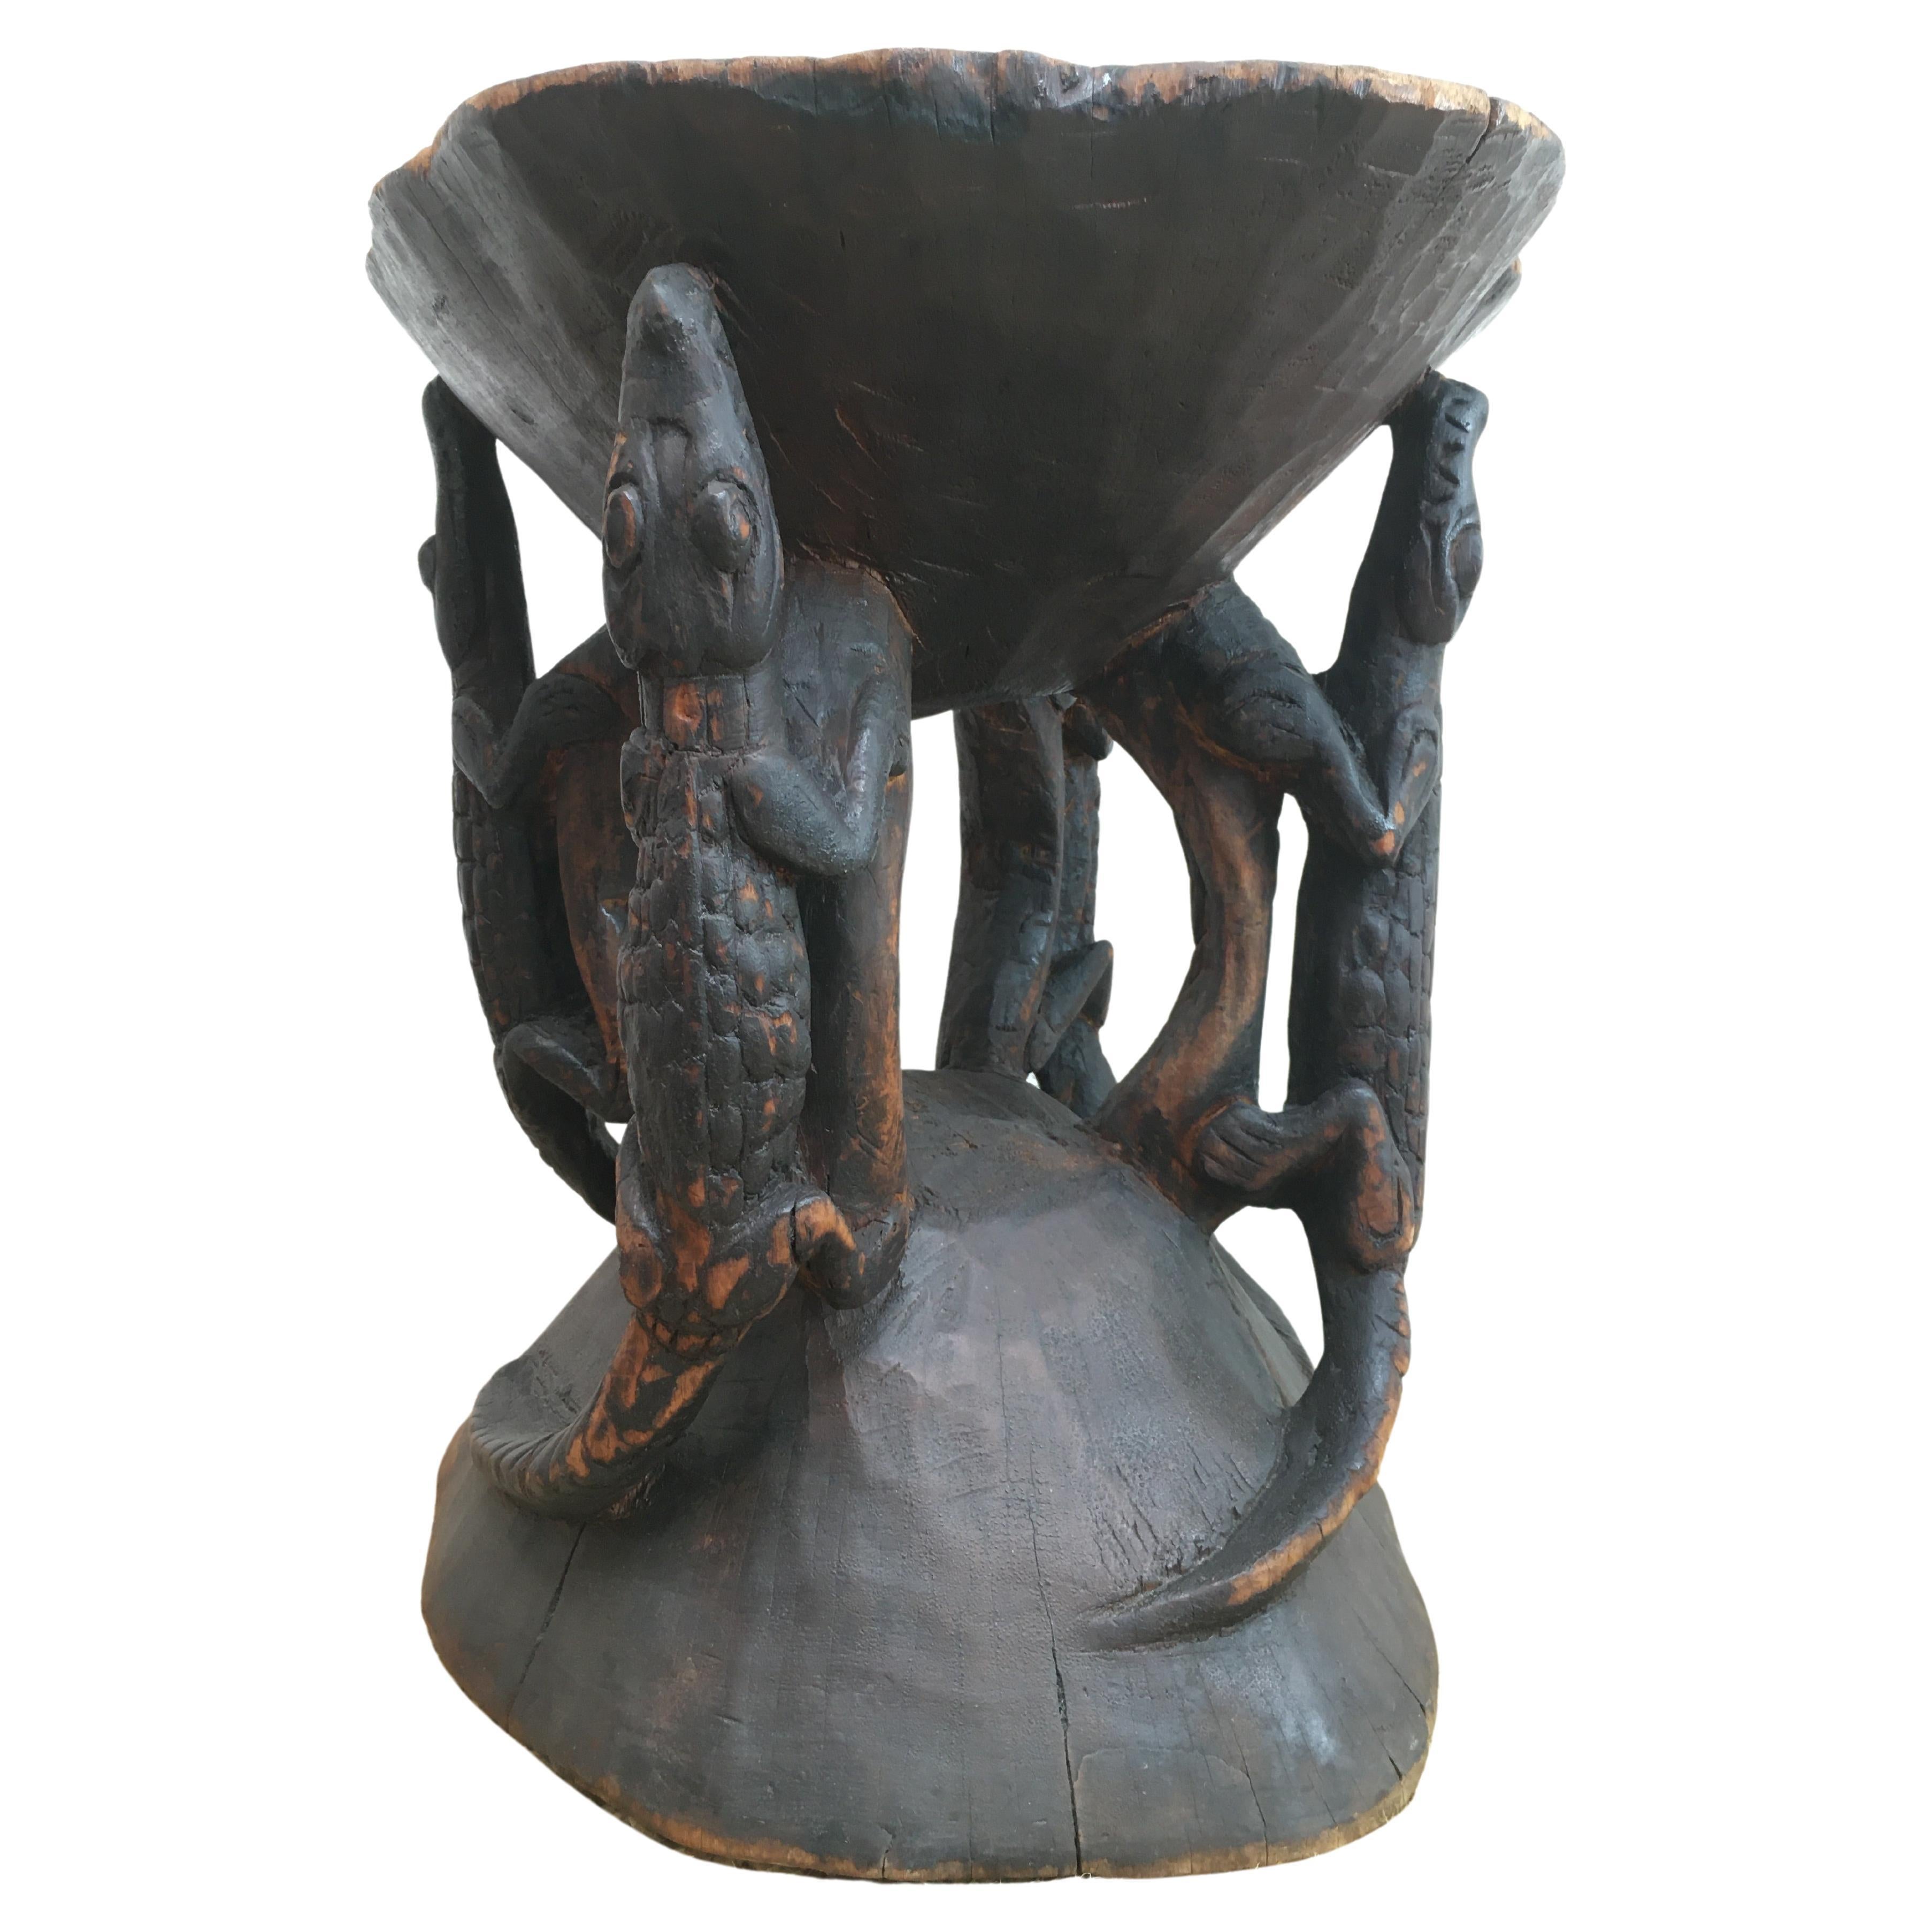 A mid 20th Century Sepik River Crocodile stool, hand carved from a single piece of solid timber. 

We suspect this stool is from the period immediately after the Second World War. Its previous owner relayed to us that it was sourced directly from